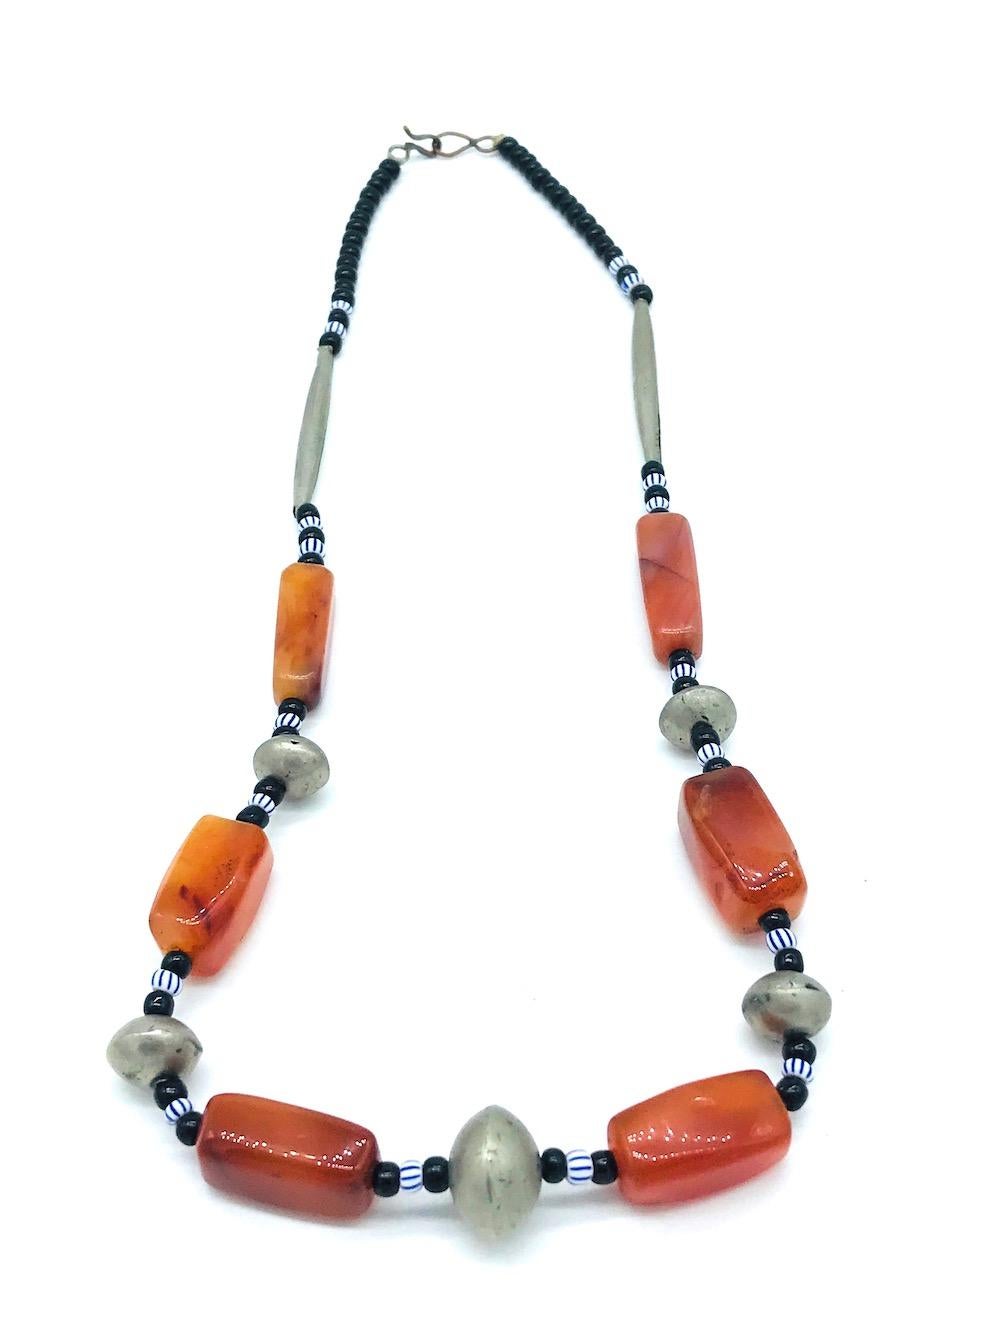 Artisan Rare Mali Africa, Orange Bead Hand Painted Necklace For Sale